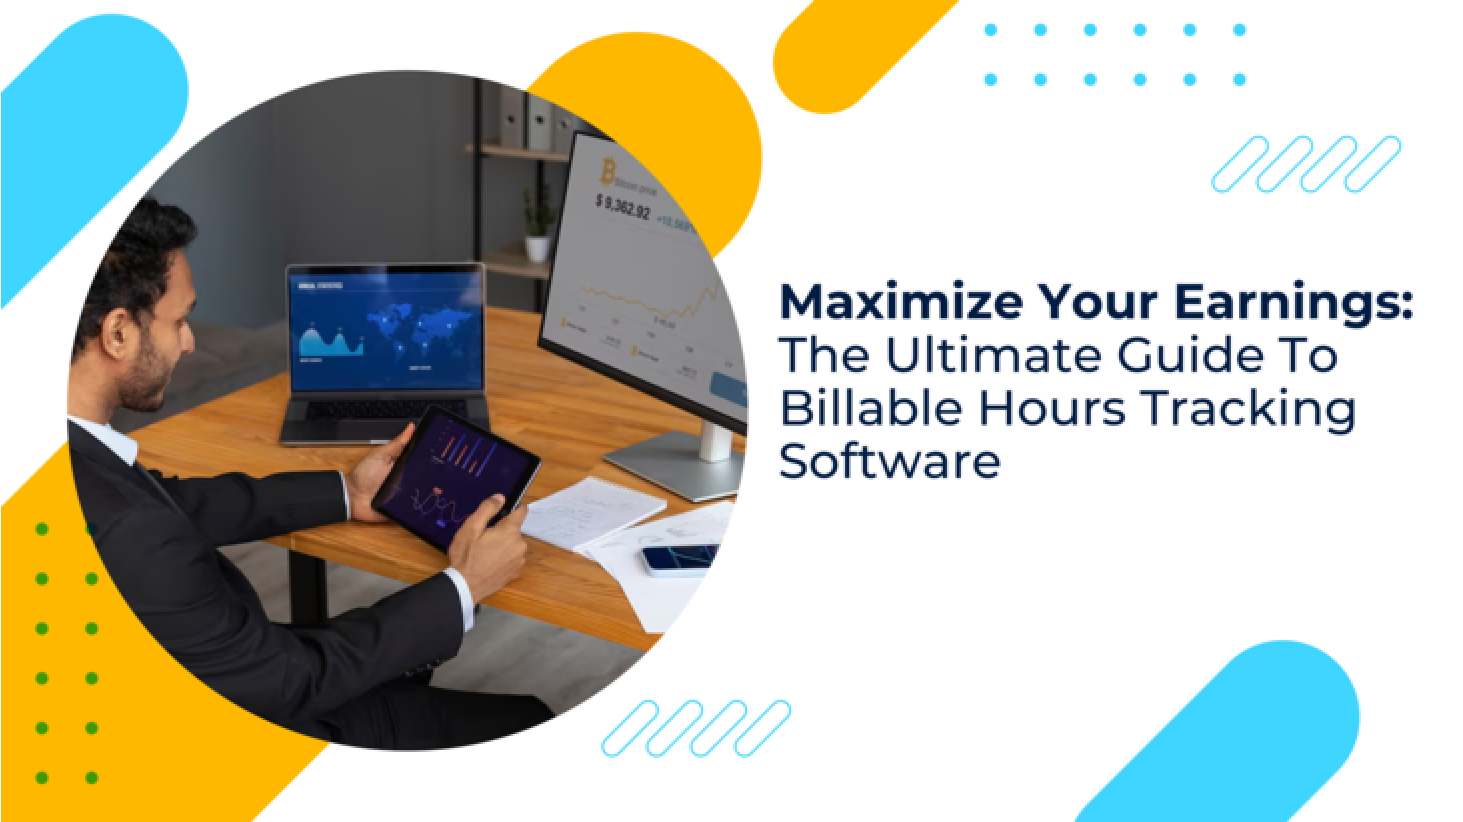 Maximize Your Earnings: The Ultimate Guide To Billable Hours Tracking Software